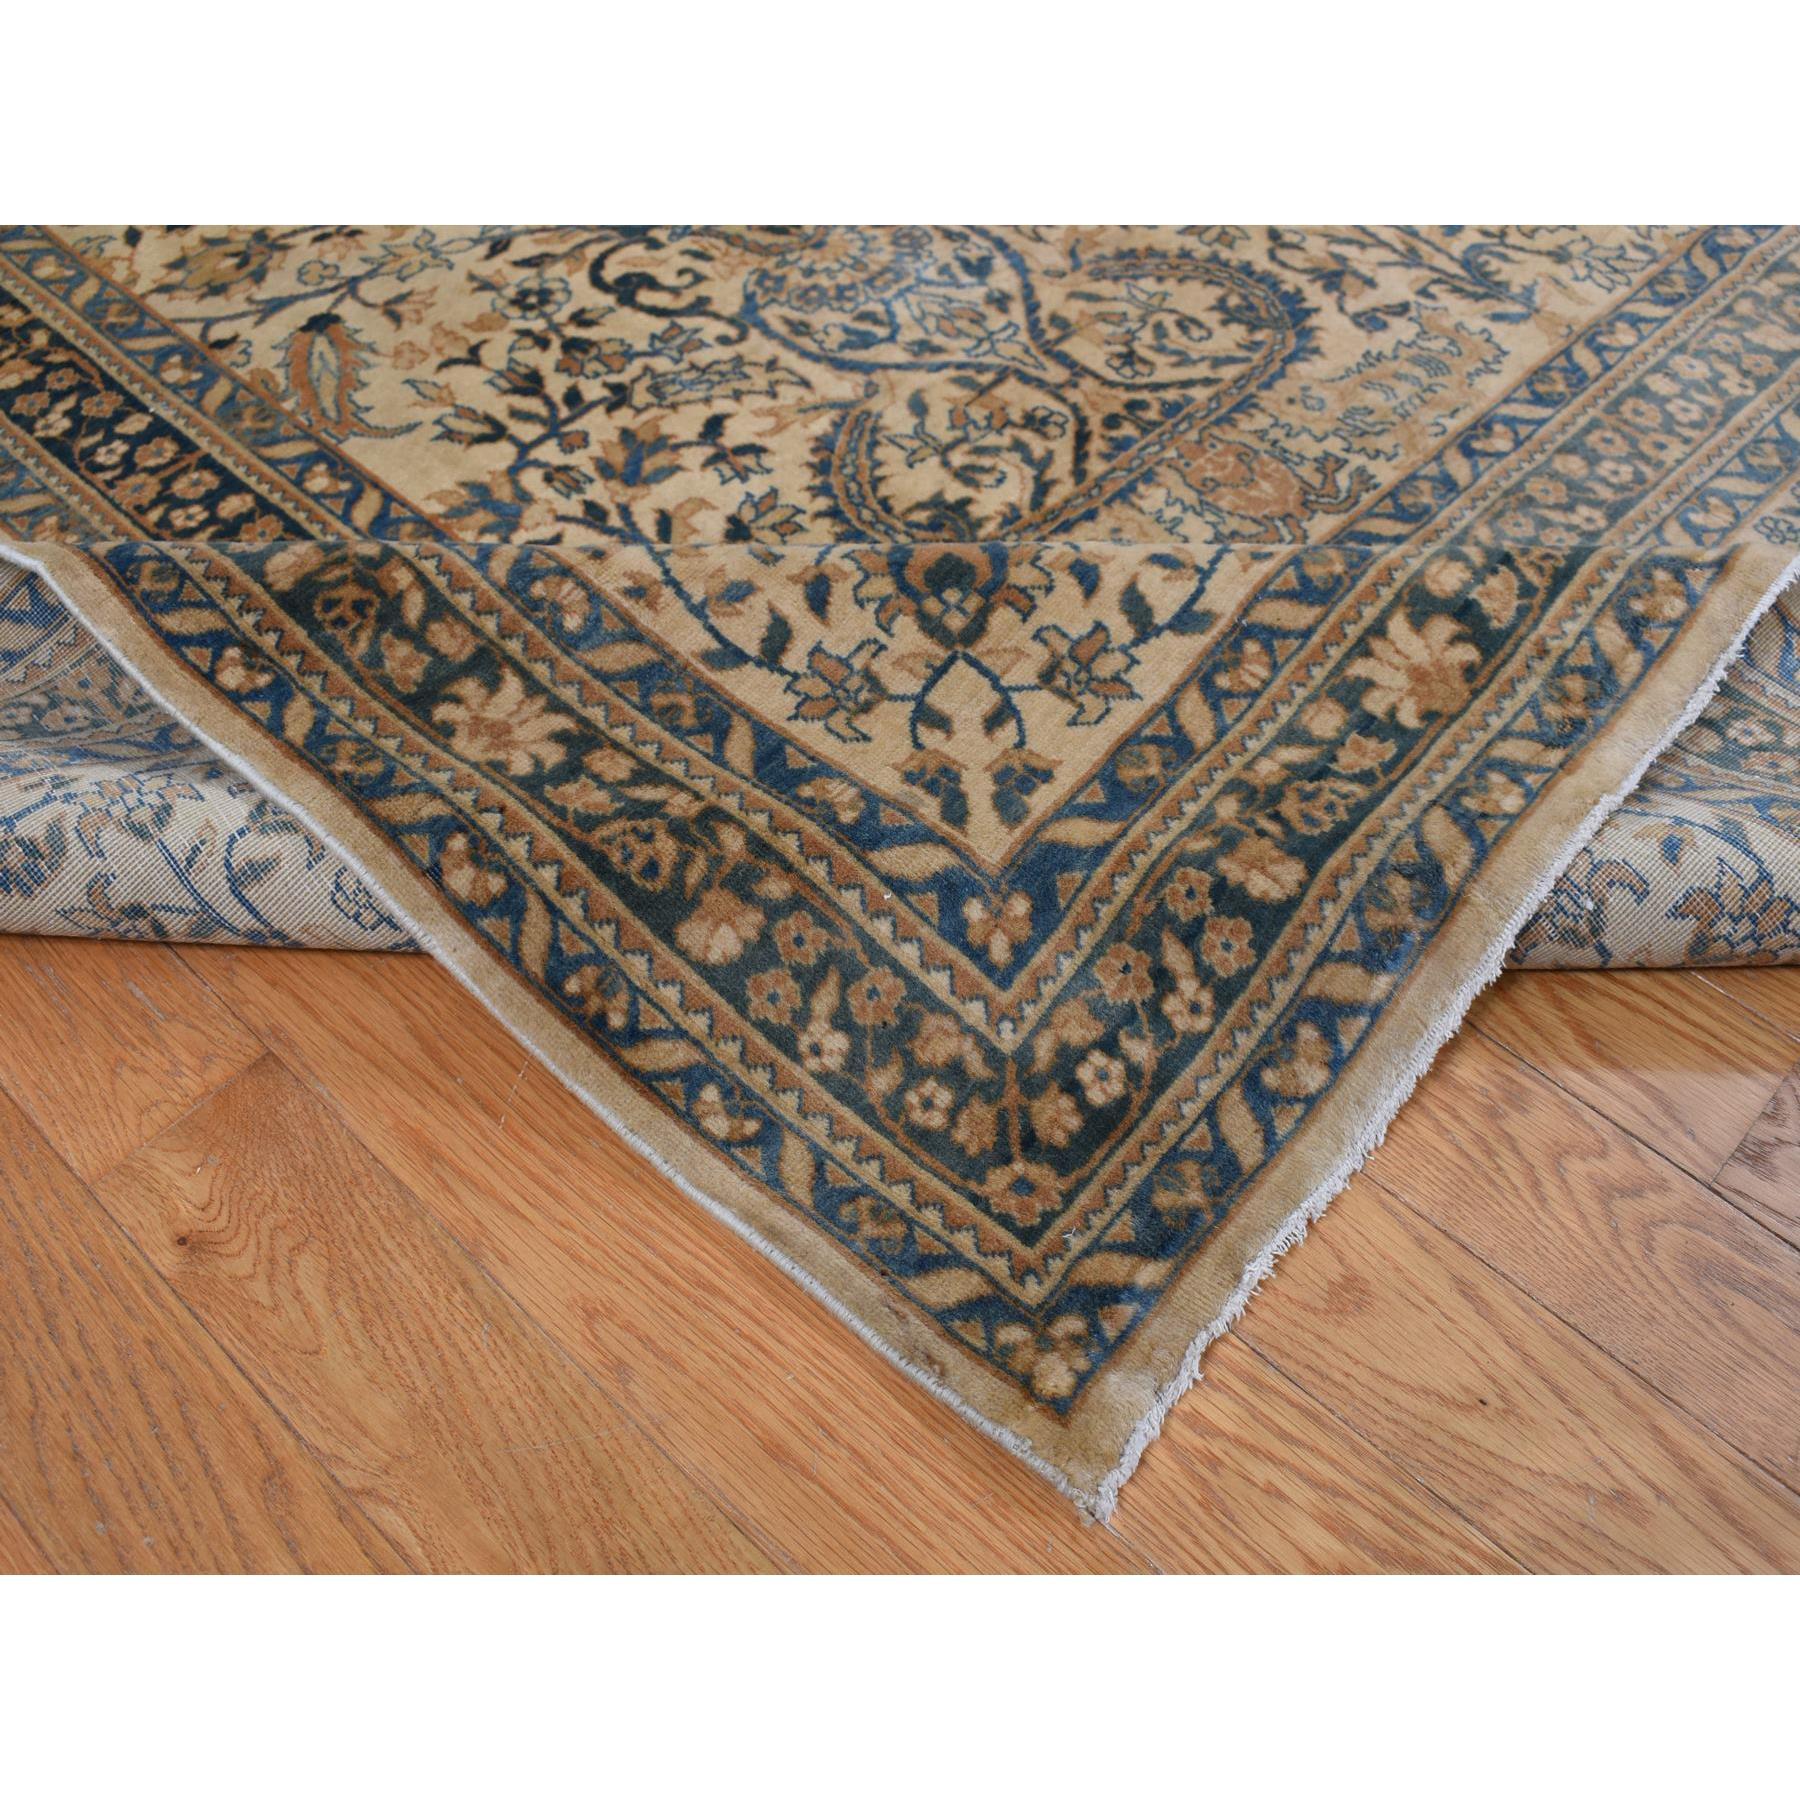 Brown Antique Indo Kerman Vase Design Hand Knotted Pure Wool 250 KPSI Runner Rug In Good Condition For Sale In Carlstadt, NJ